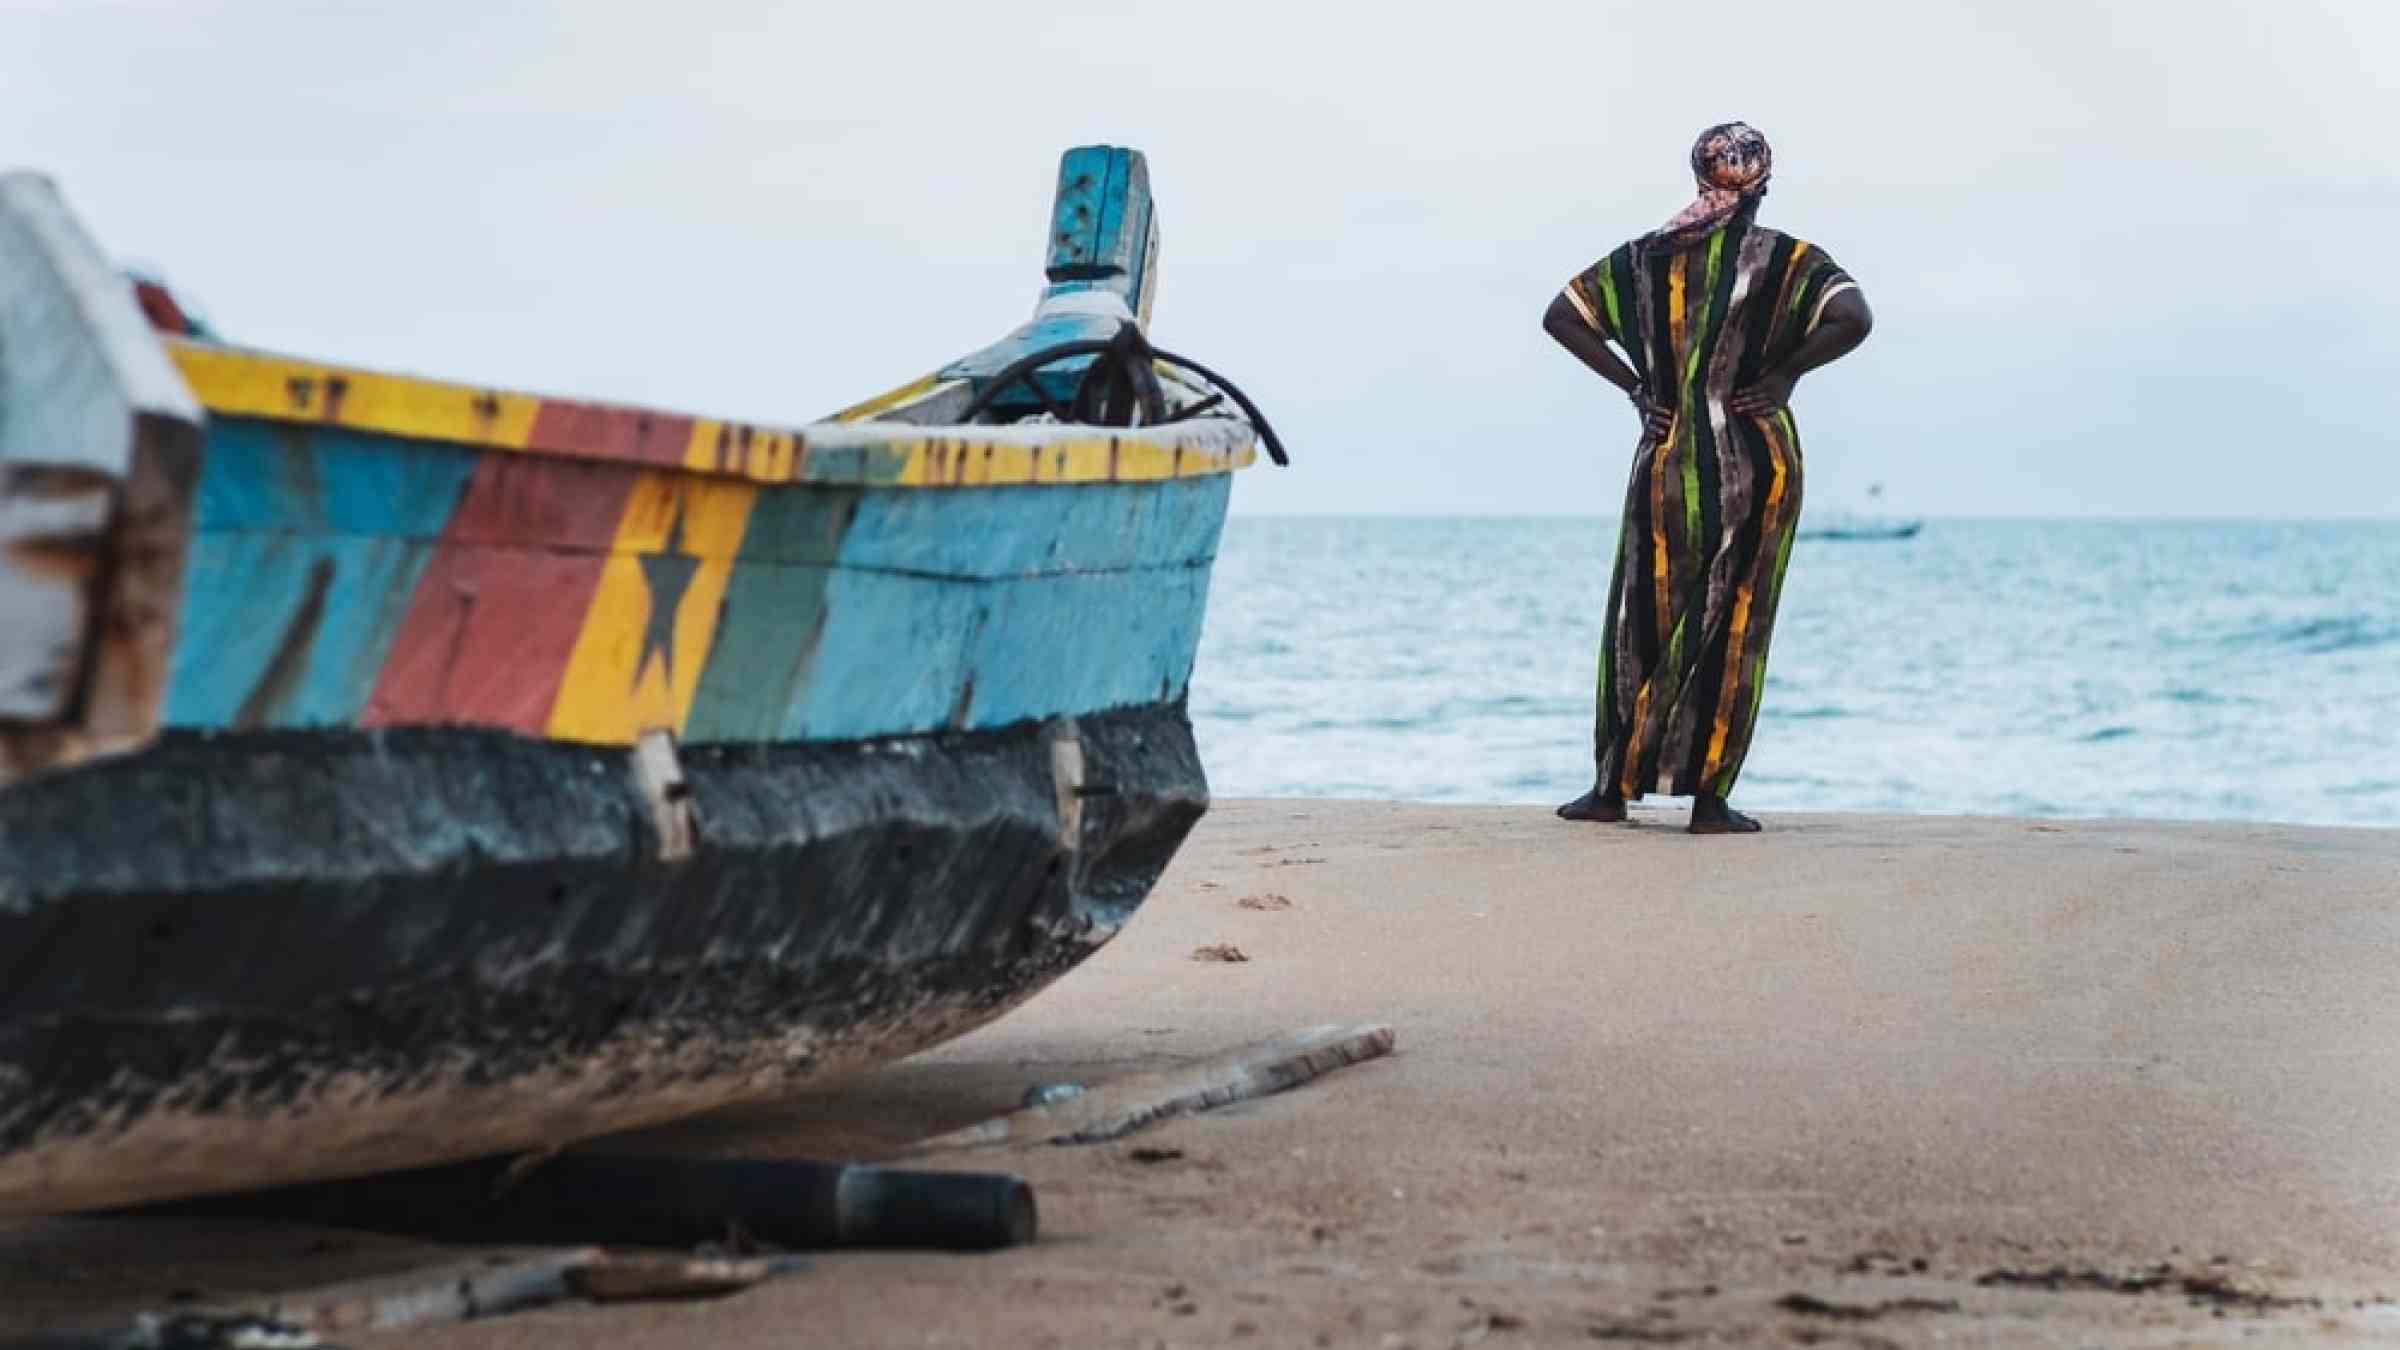 African woman in long suit standing by the shore and looking out over the sea in Keta Ghana, West Africa.